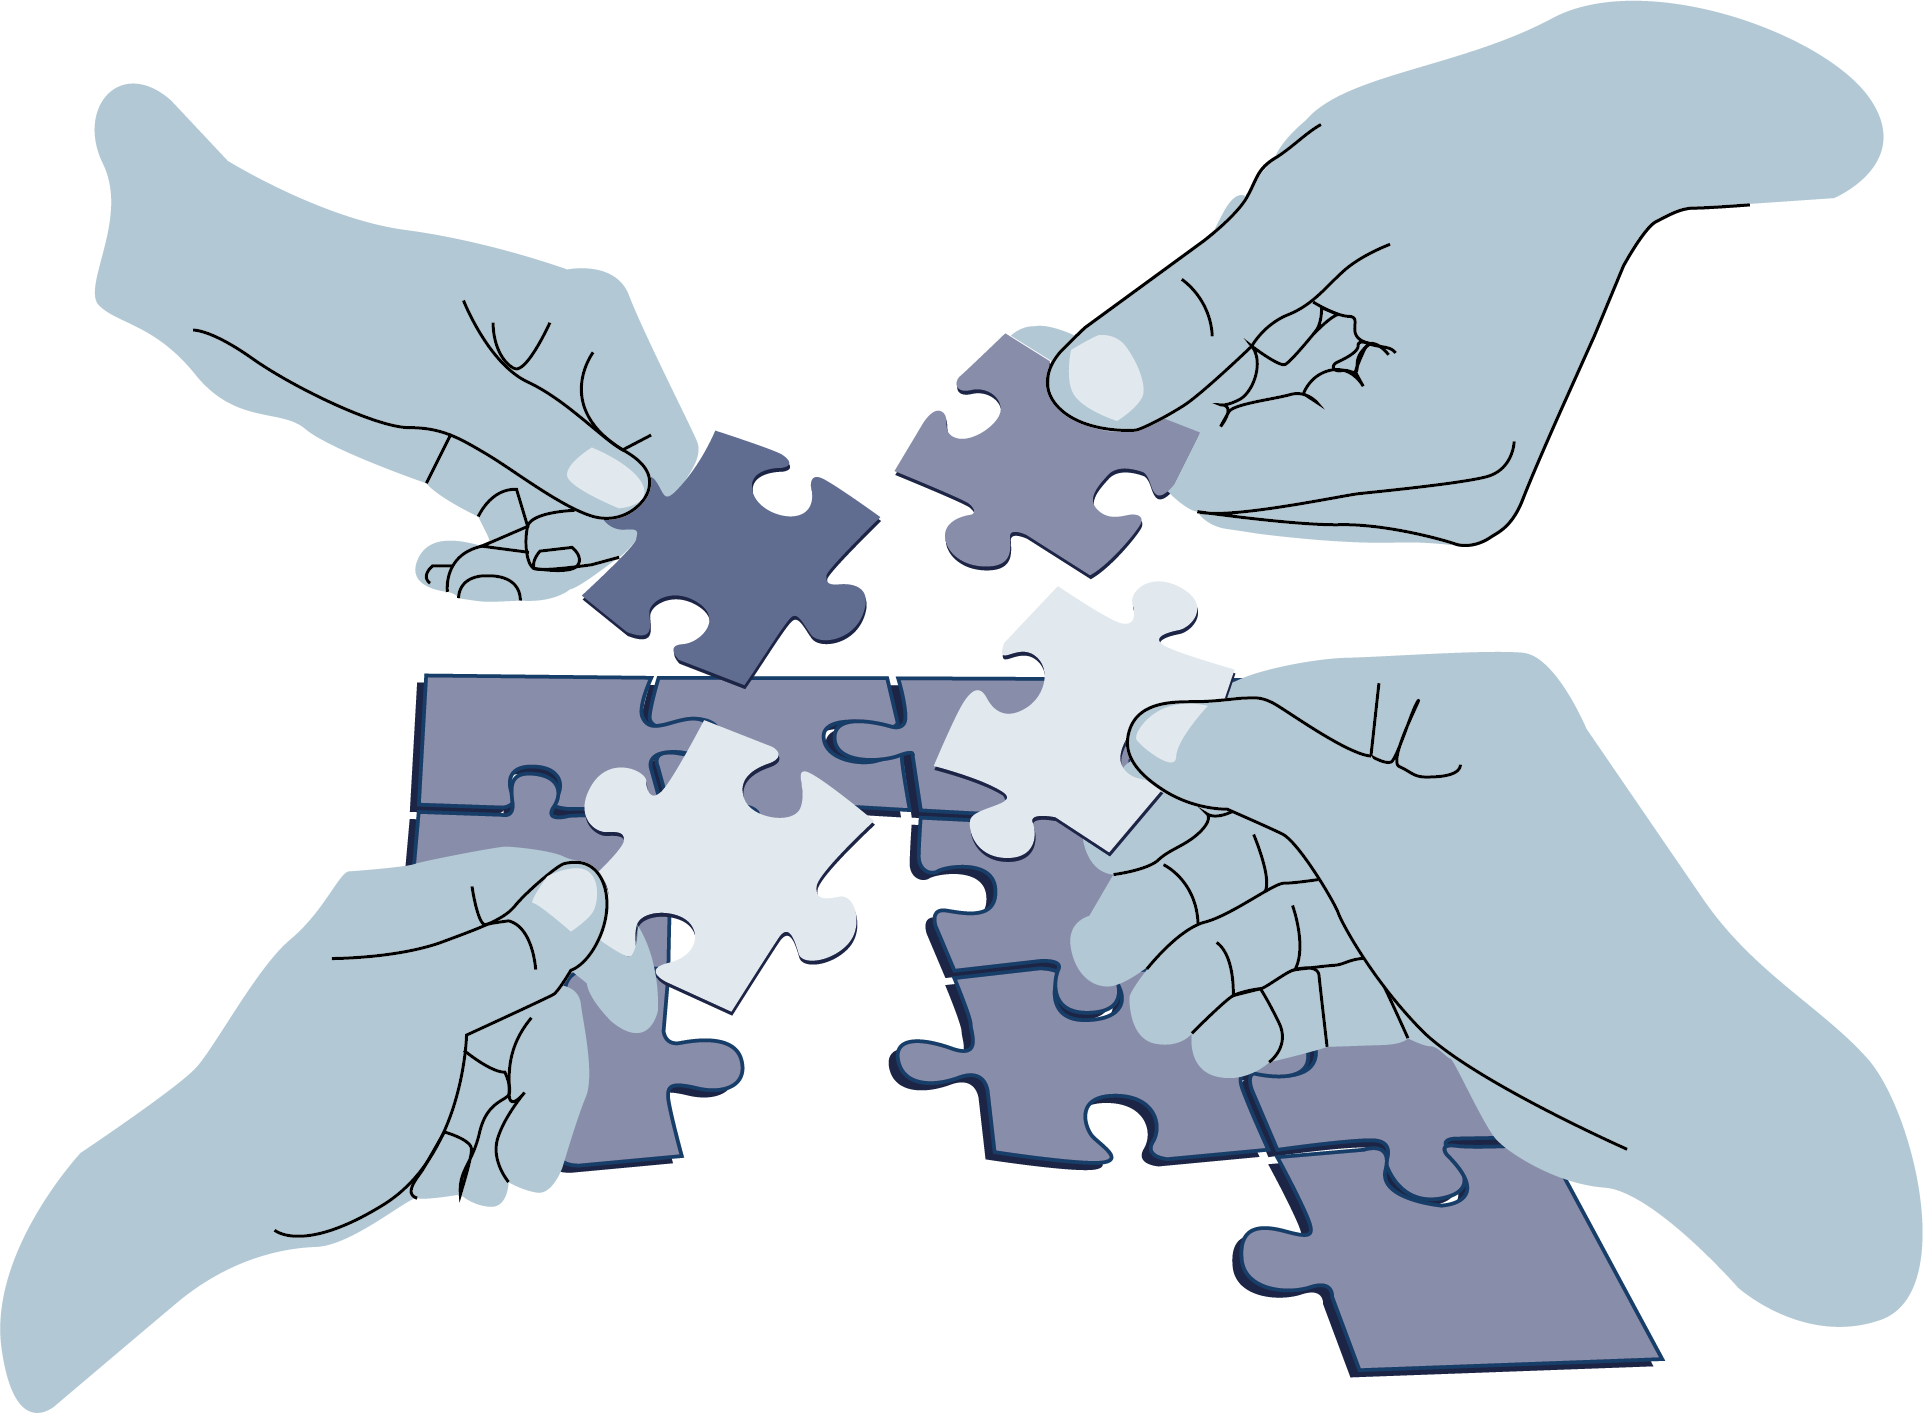 Multiple hands putting puzzle pieces together